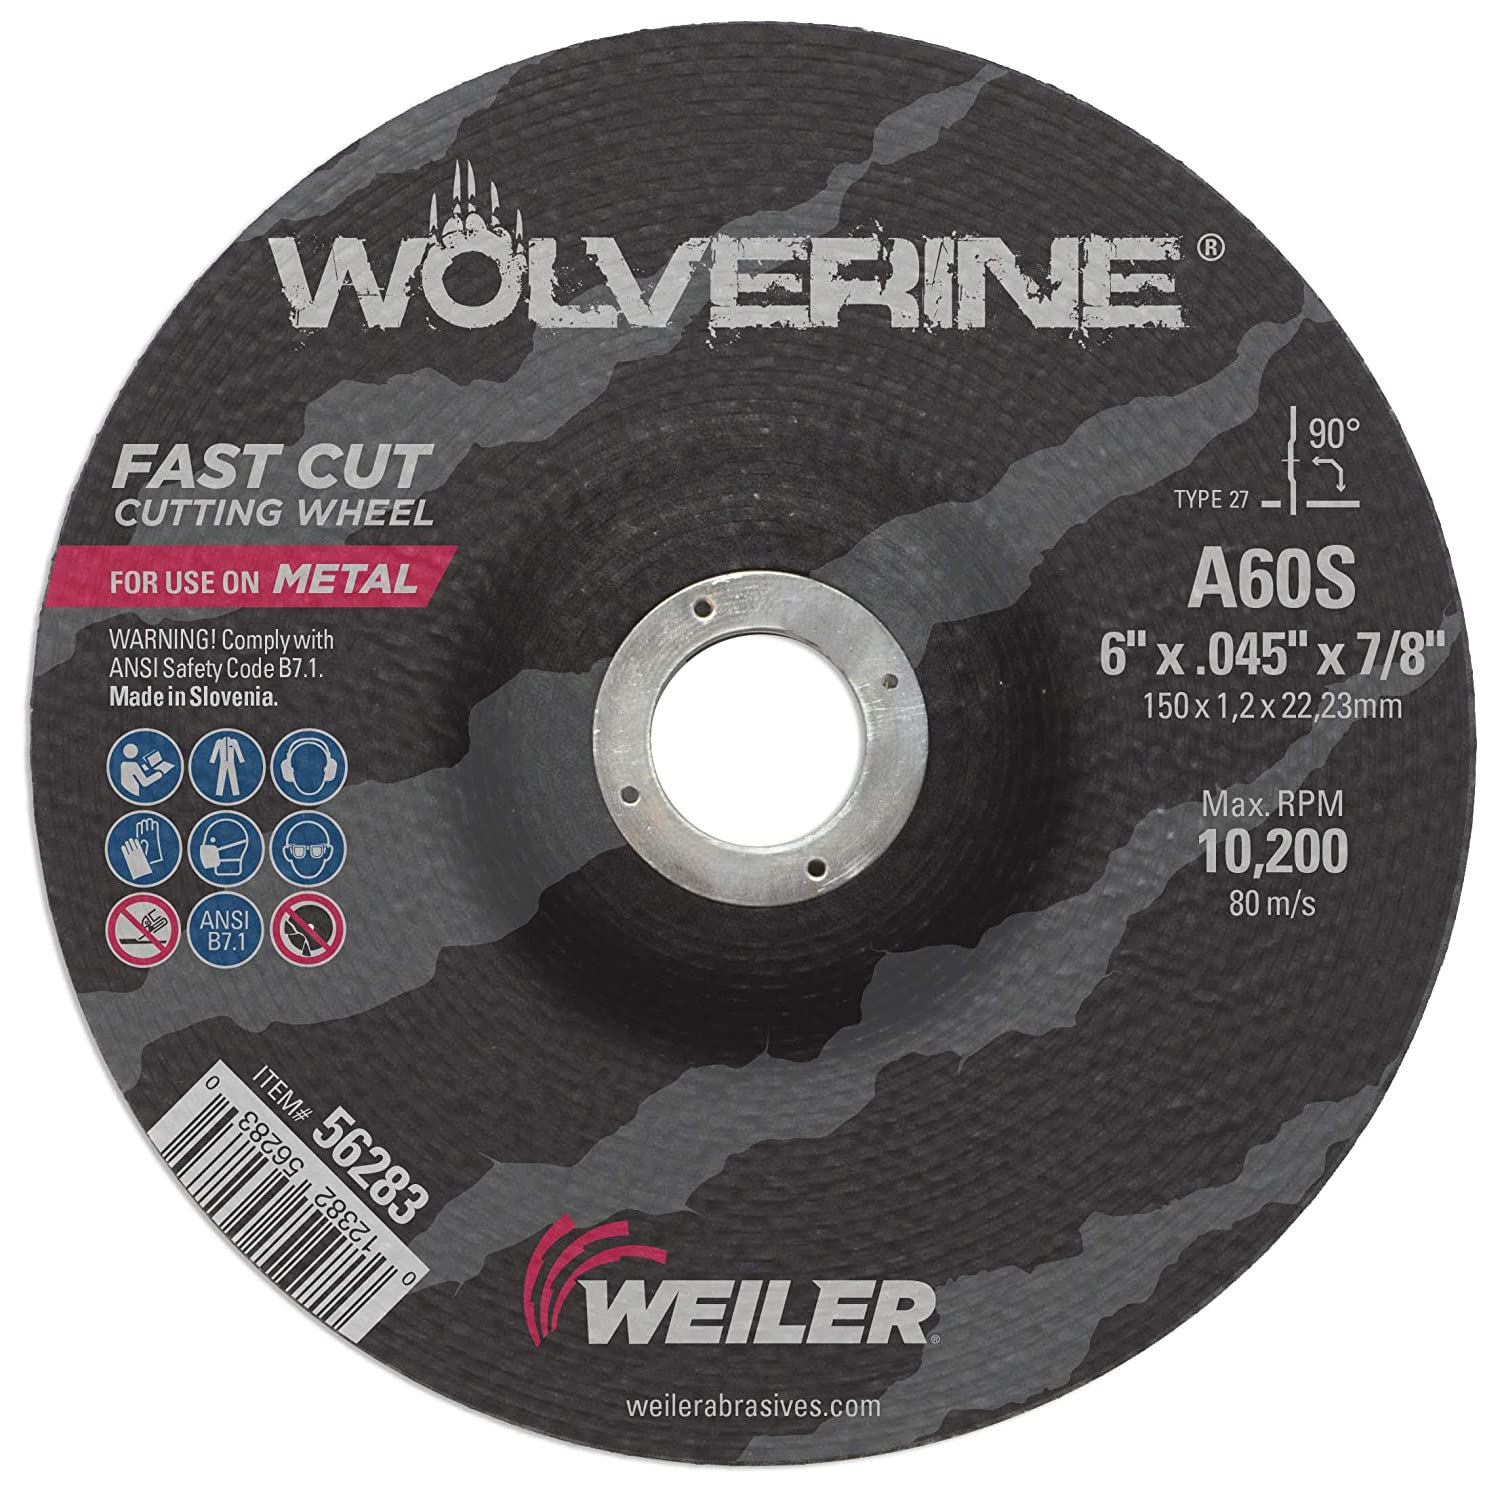 6" X .045" WOLVERINE TYPE 27 CUTTING WHEEL, A60S, 7/8" A.H.